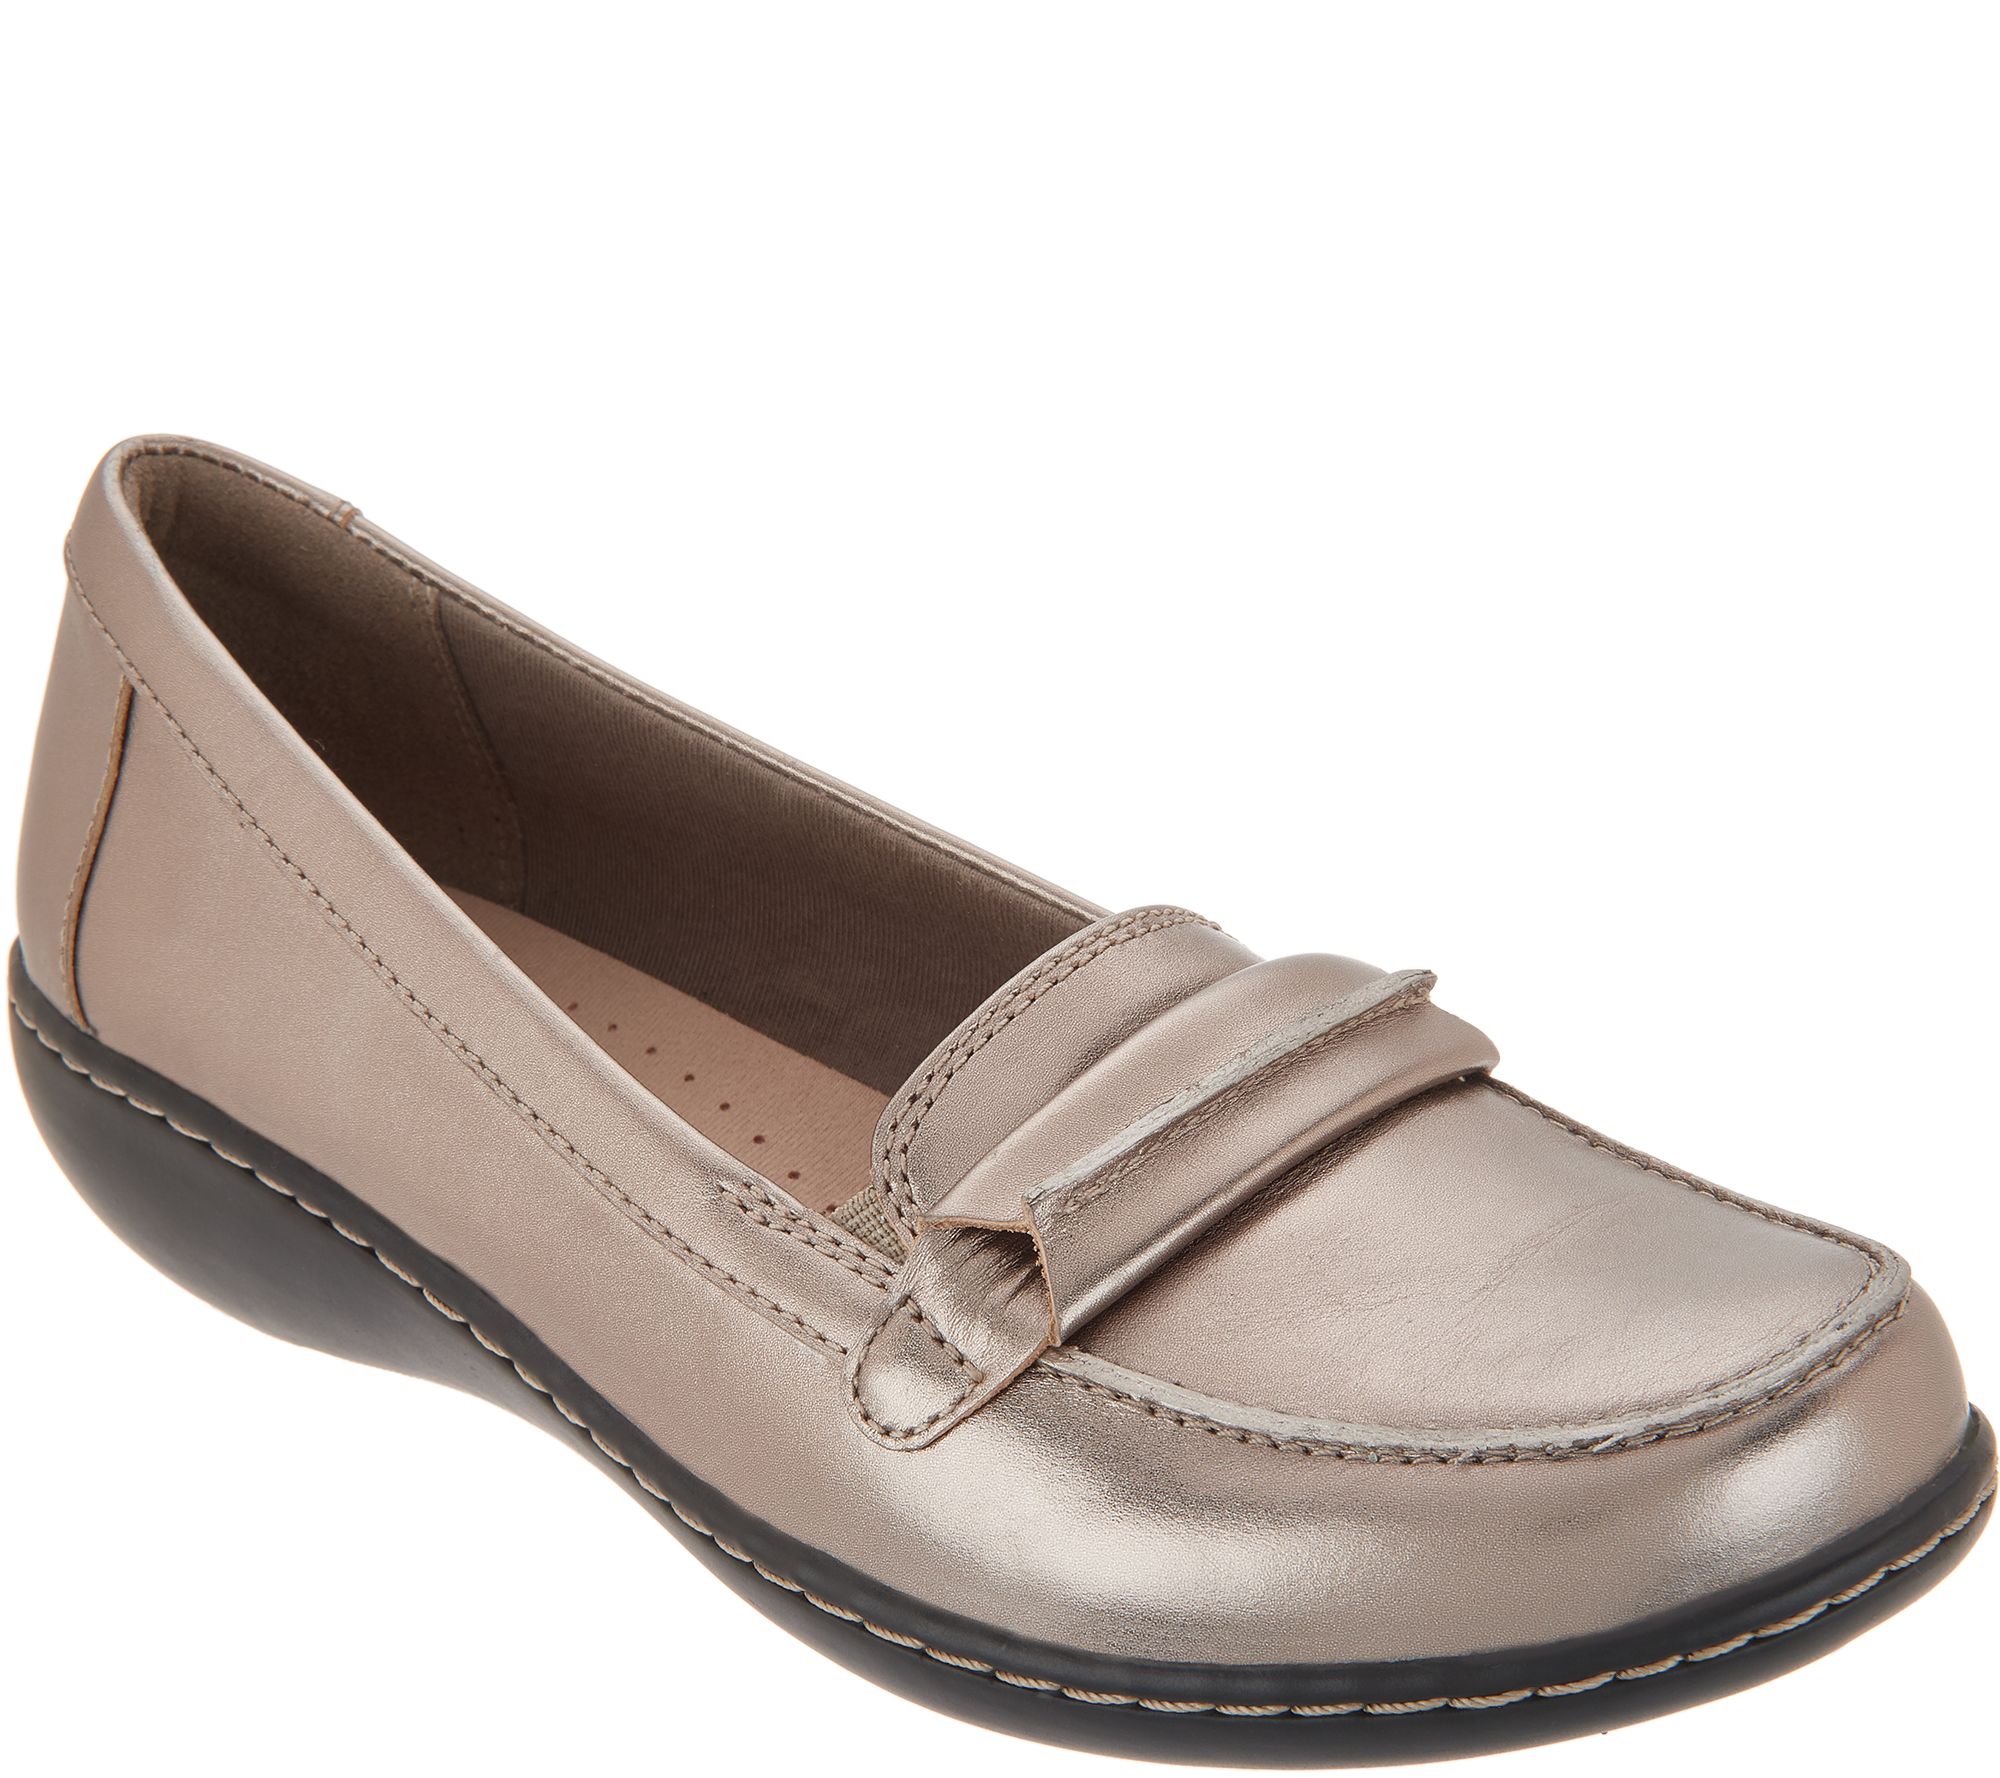 qvc clark shoes easy pay